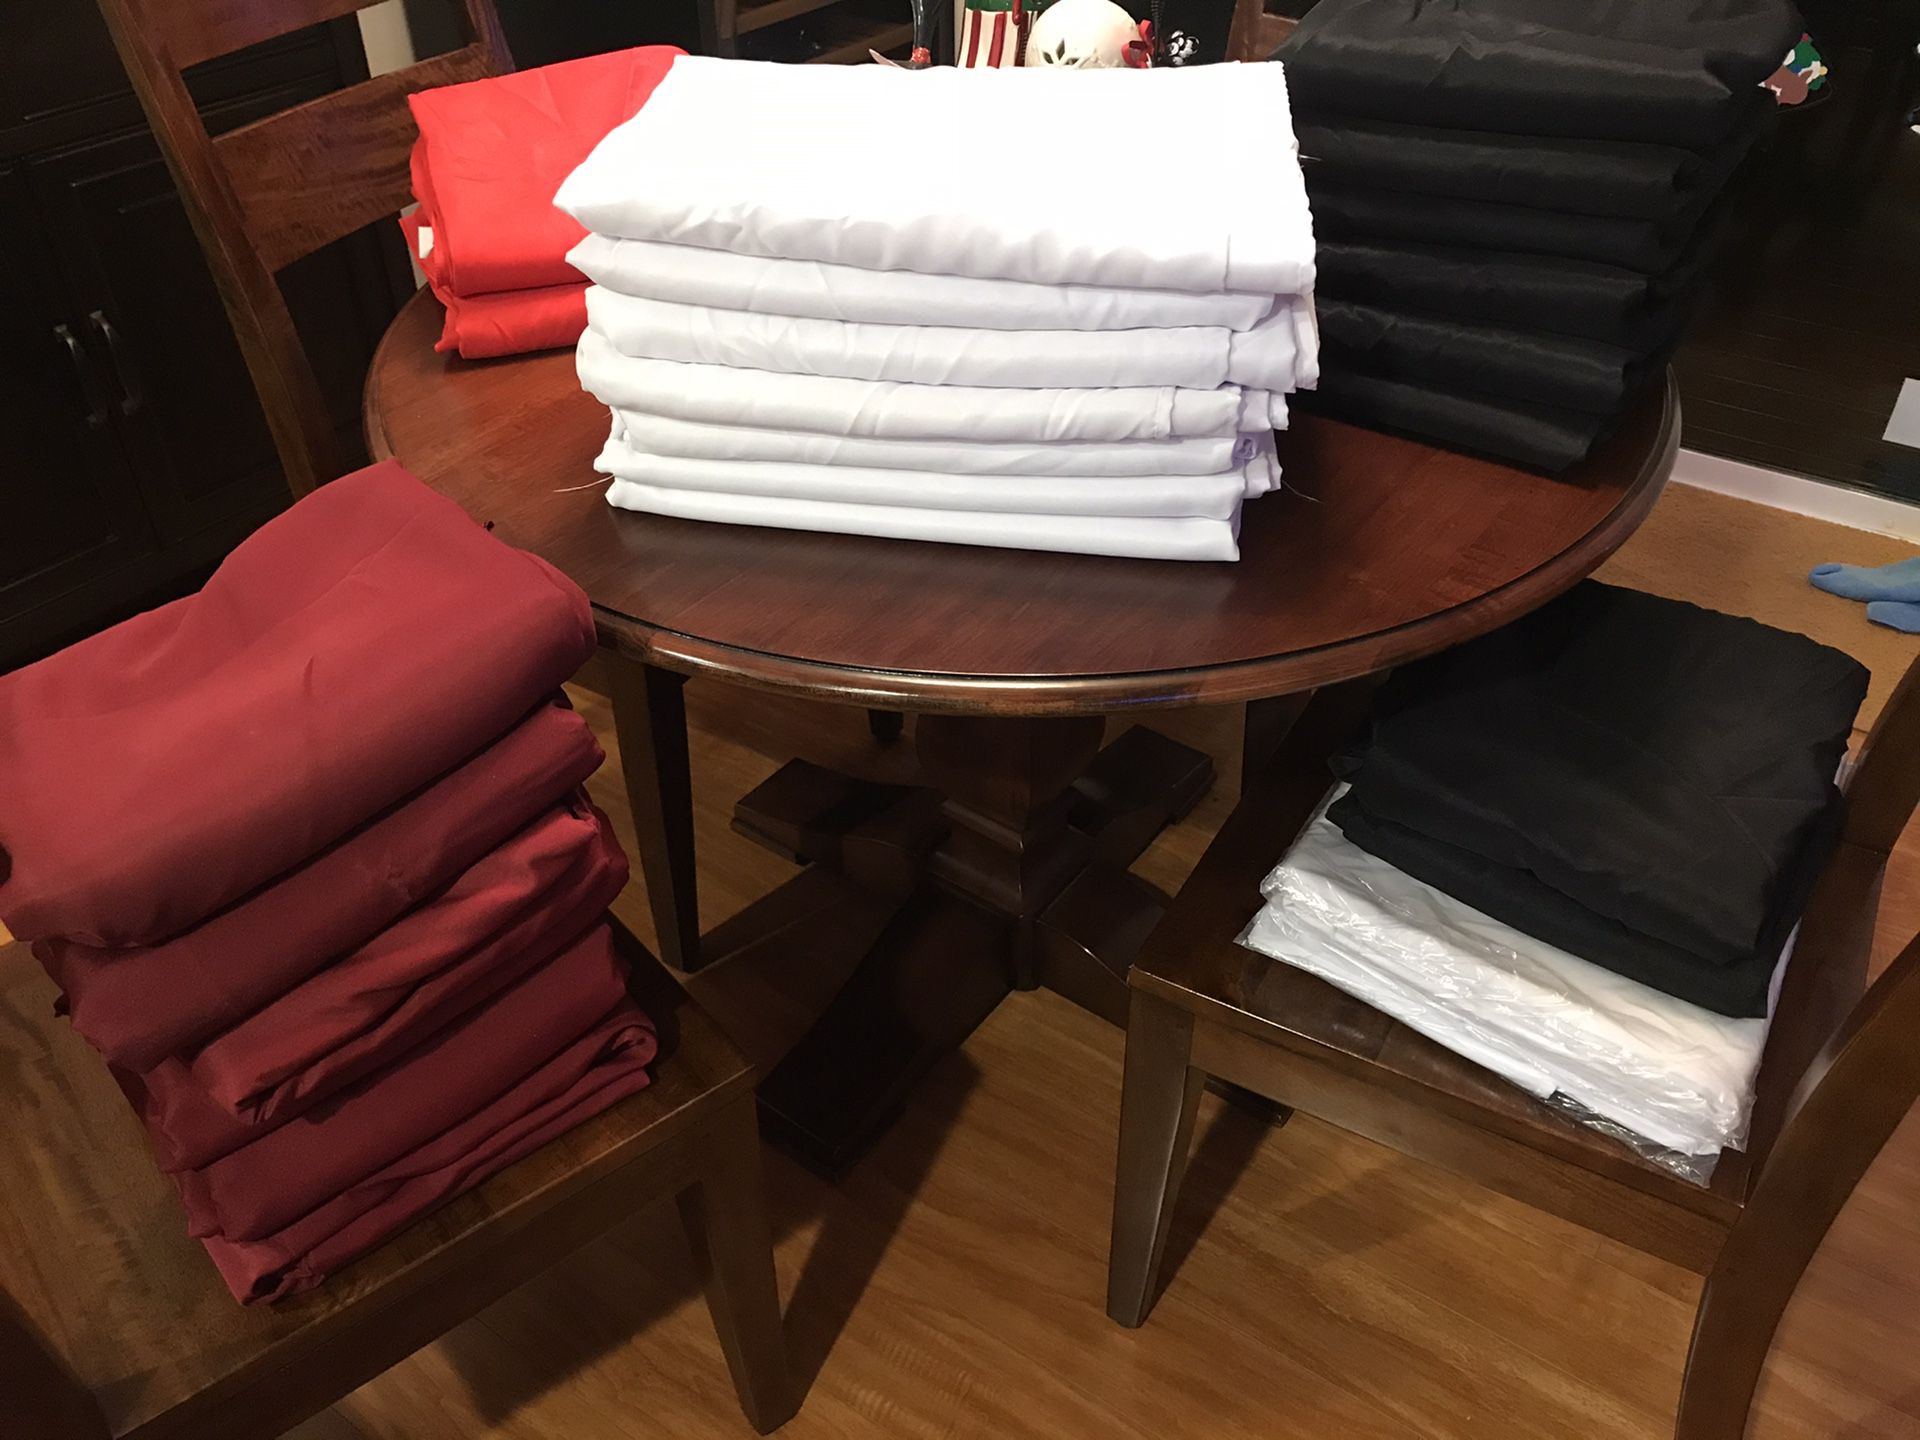 Tablecloths/ Linens: Red, White, Black, and Burgandy